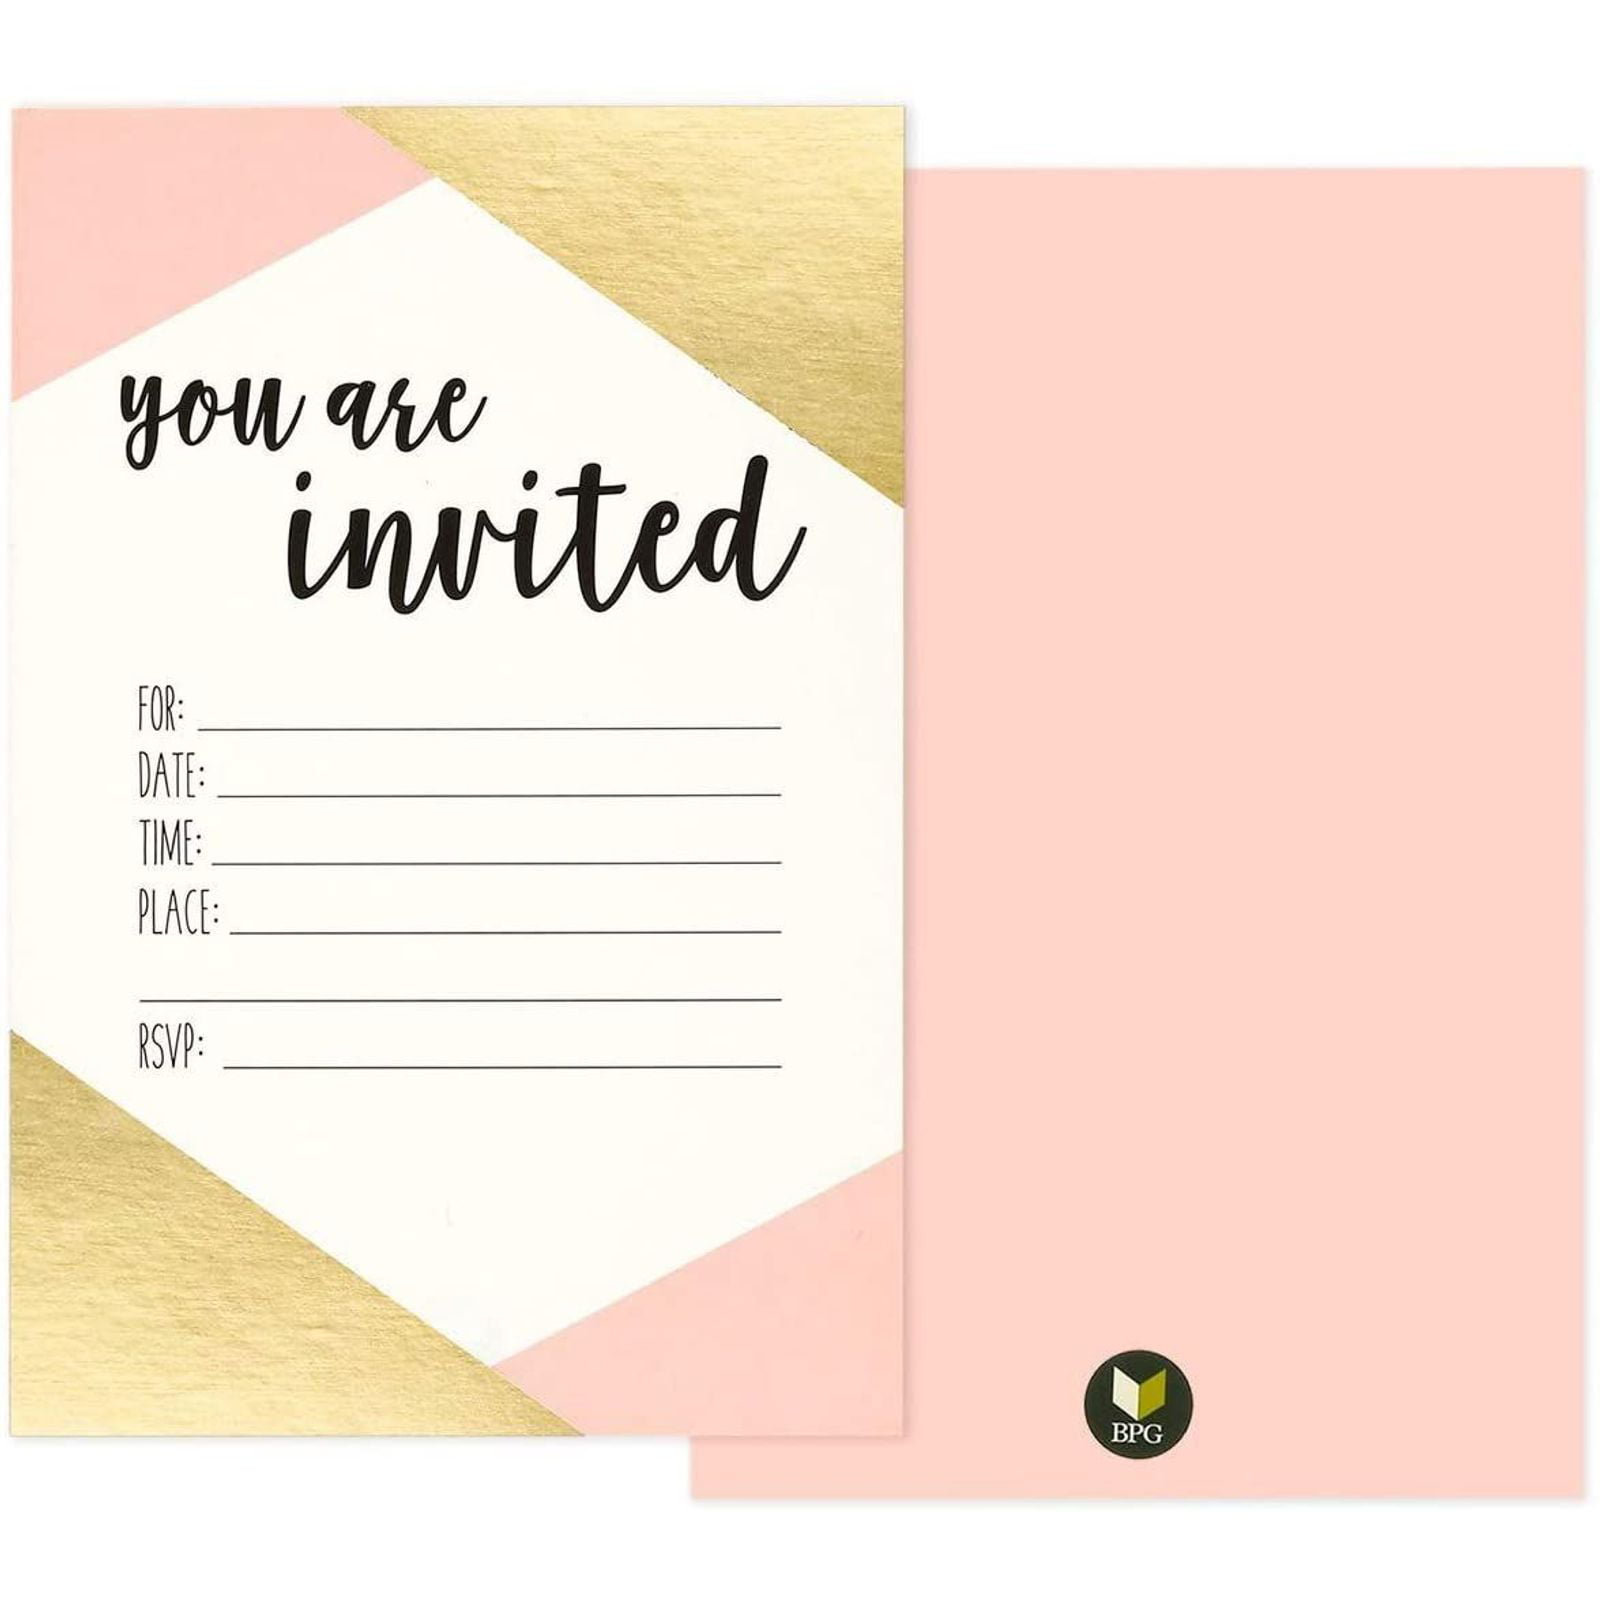 C5 GOLD Coloured Envelopes-Party Invitations Craft Greeting Card 162x229mm x 25 